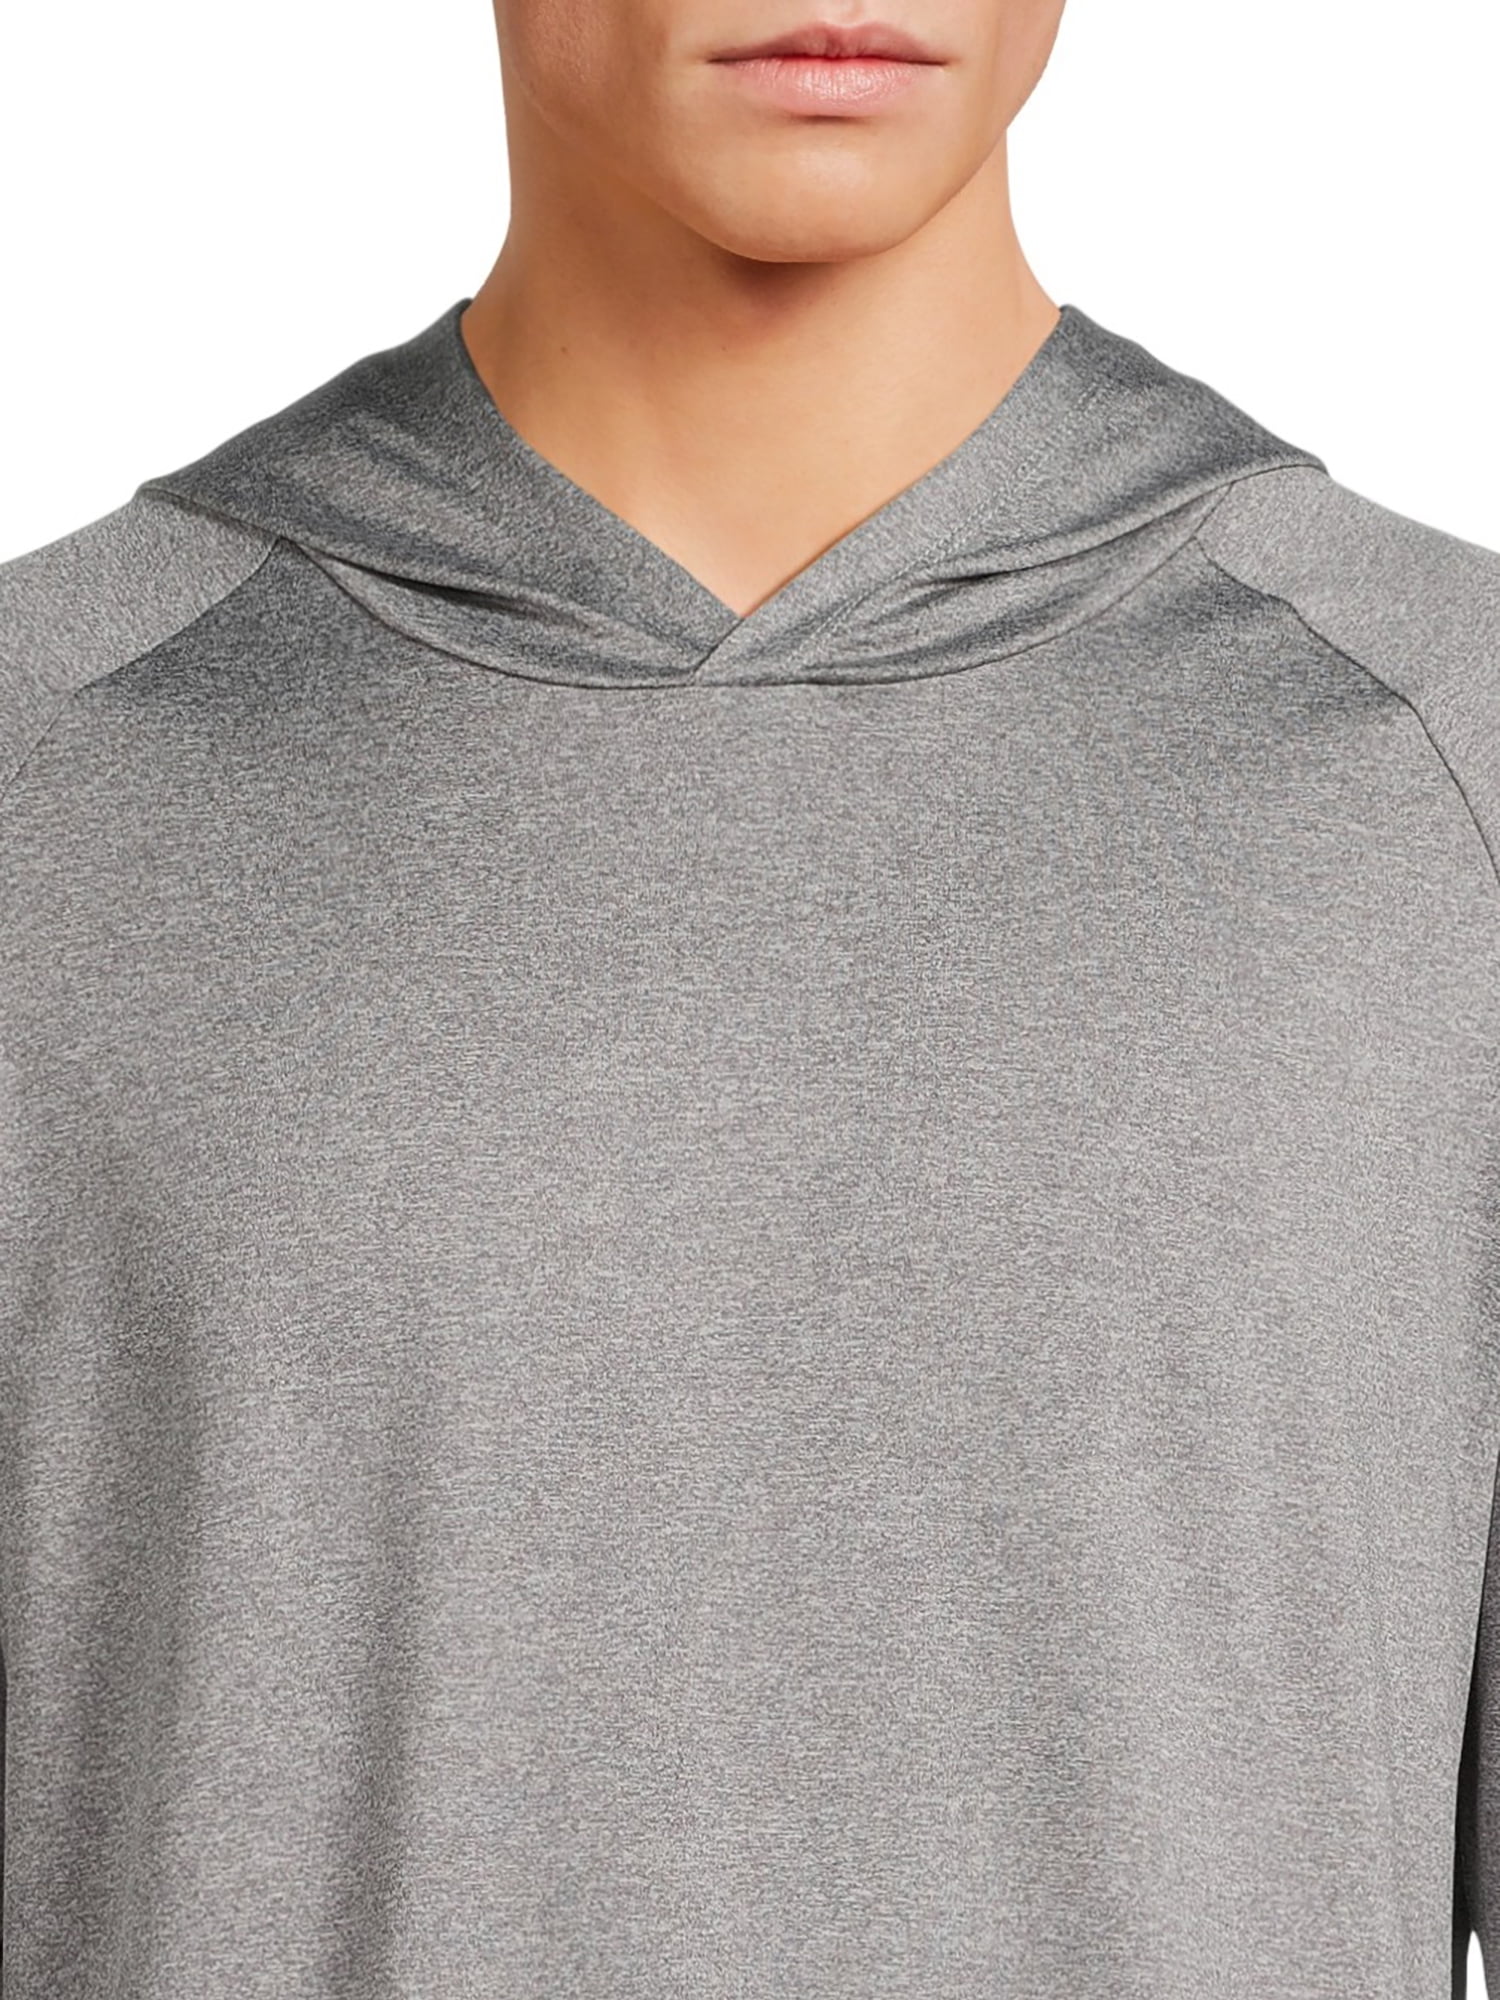 George Men’s Hooded Sun Shirt with Long Sleeves, Sizes S-3XL